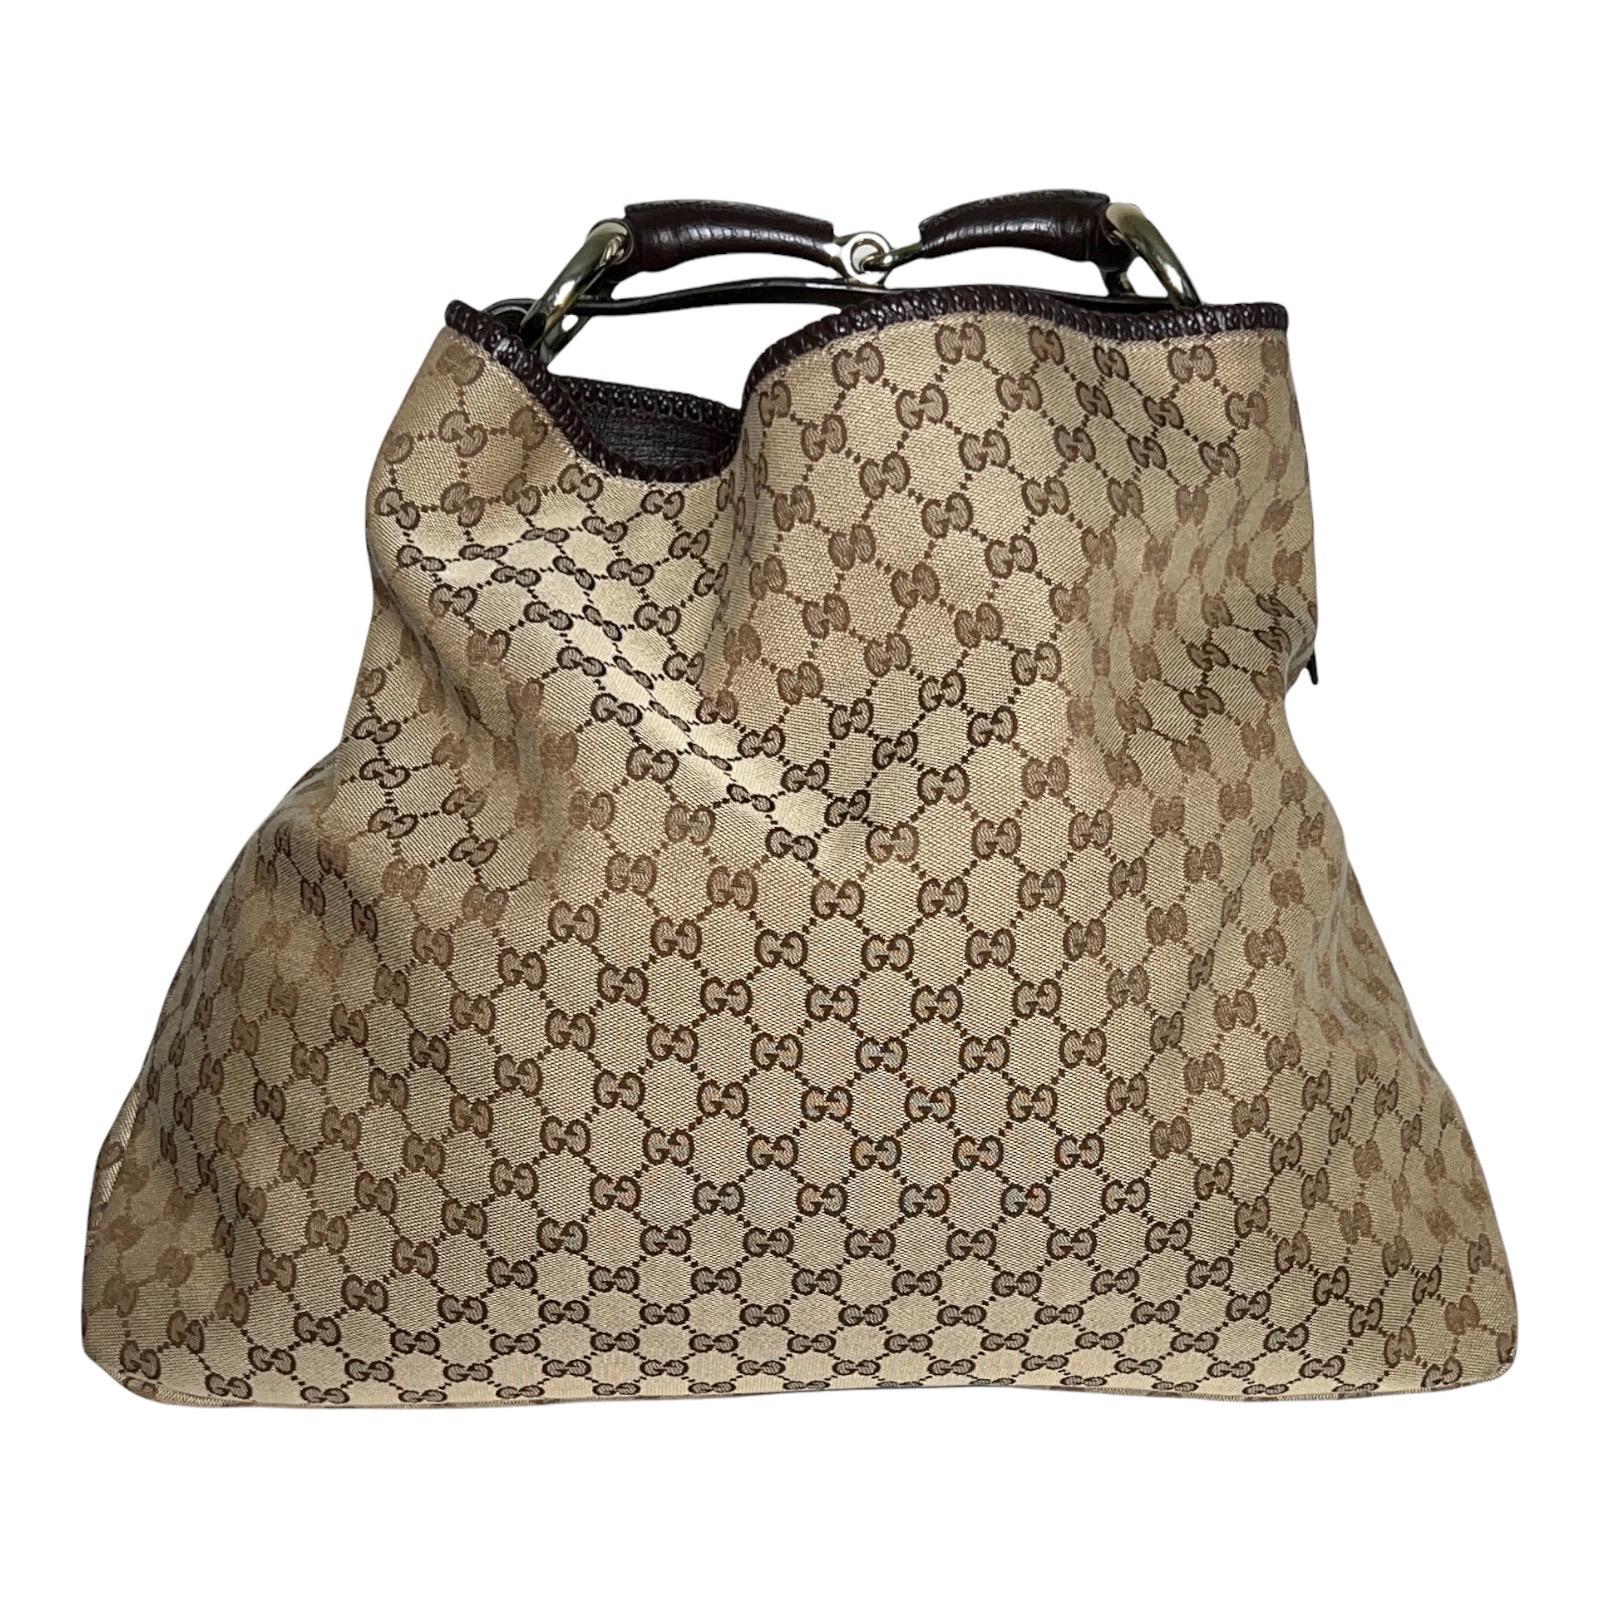 

GUCCI MONOGRAM GG HORSEBIT HOBO BAG

XL SIZE

DETAILS: 
A GUCCI signature piece that will last you for many years
Timeless classic - a true beauty!
Made of GG Monogram printed canvas fabric
A truly luxurious and elegant piece
Completely lined with